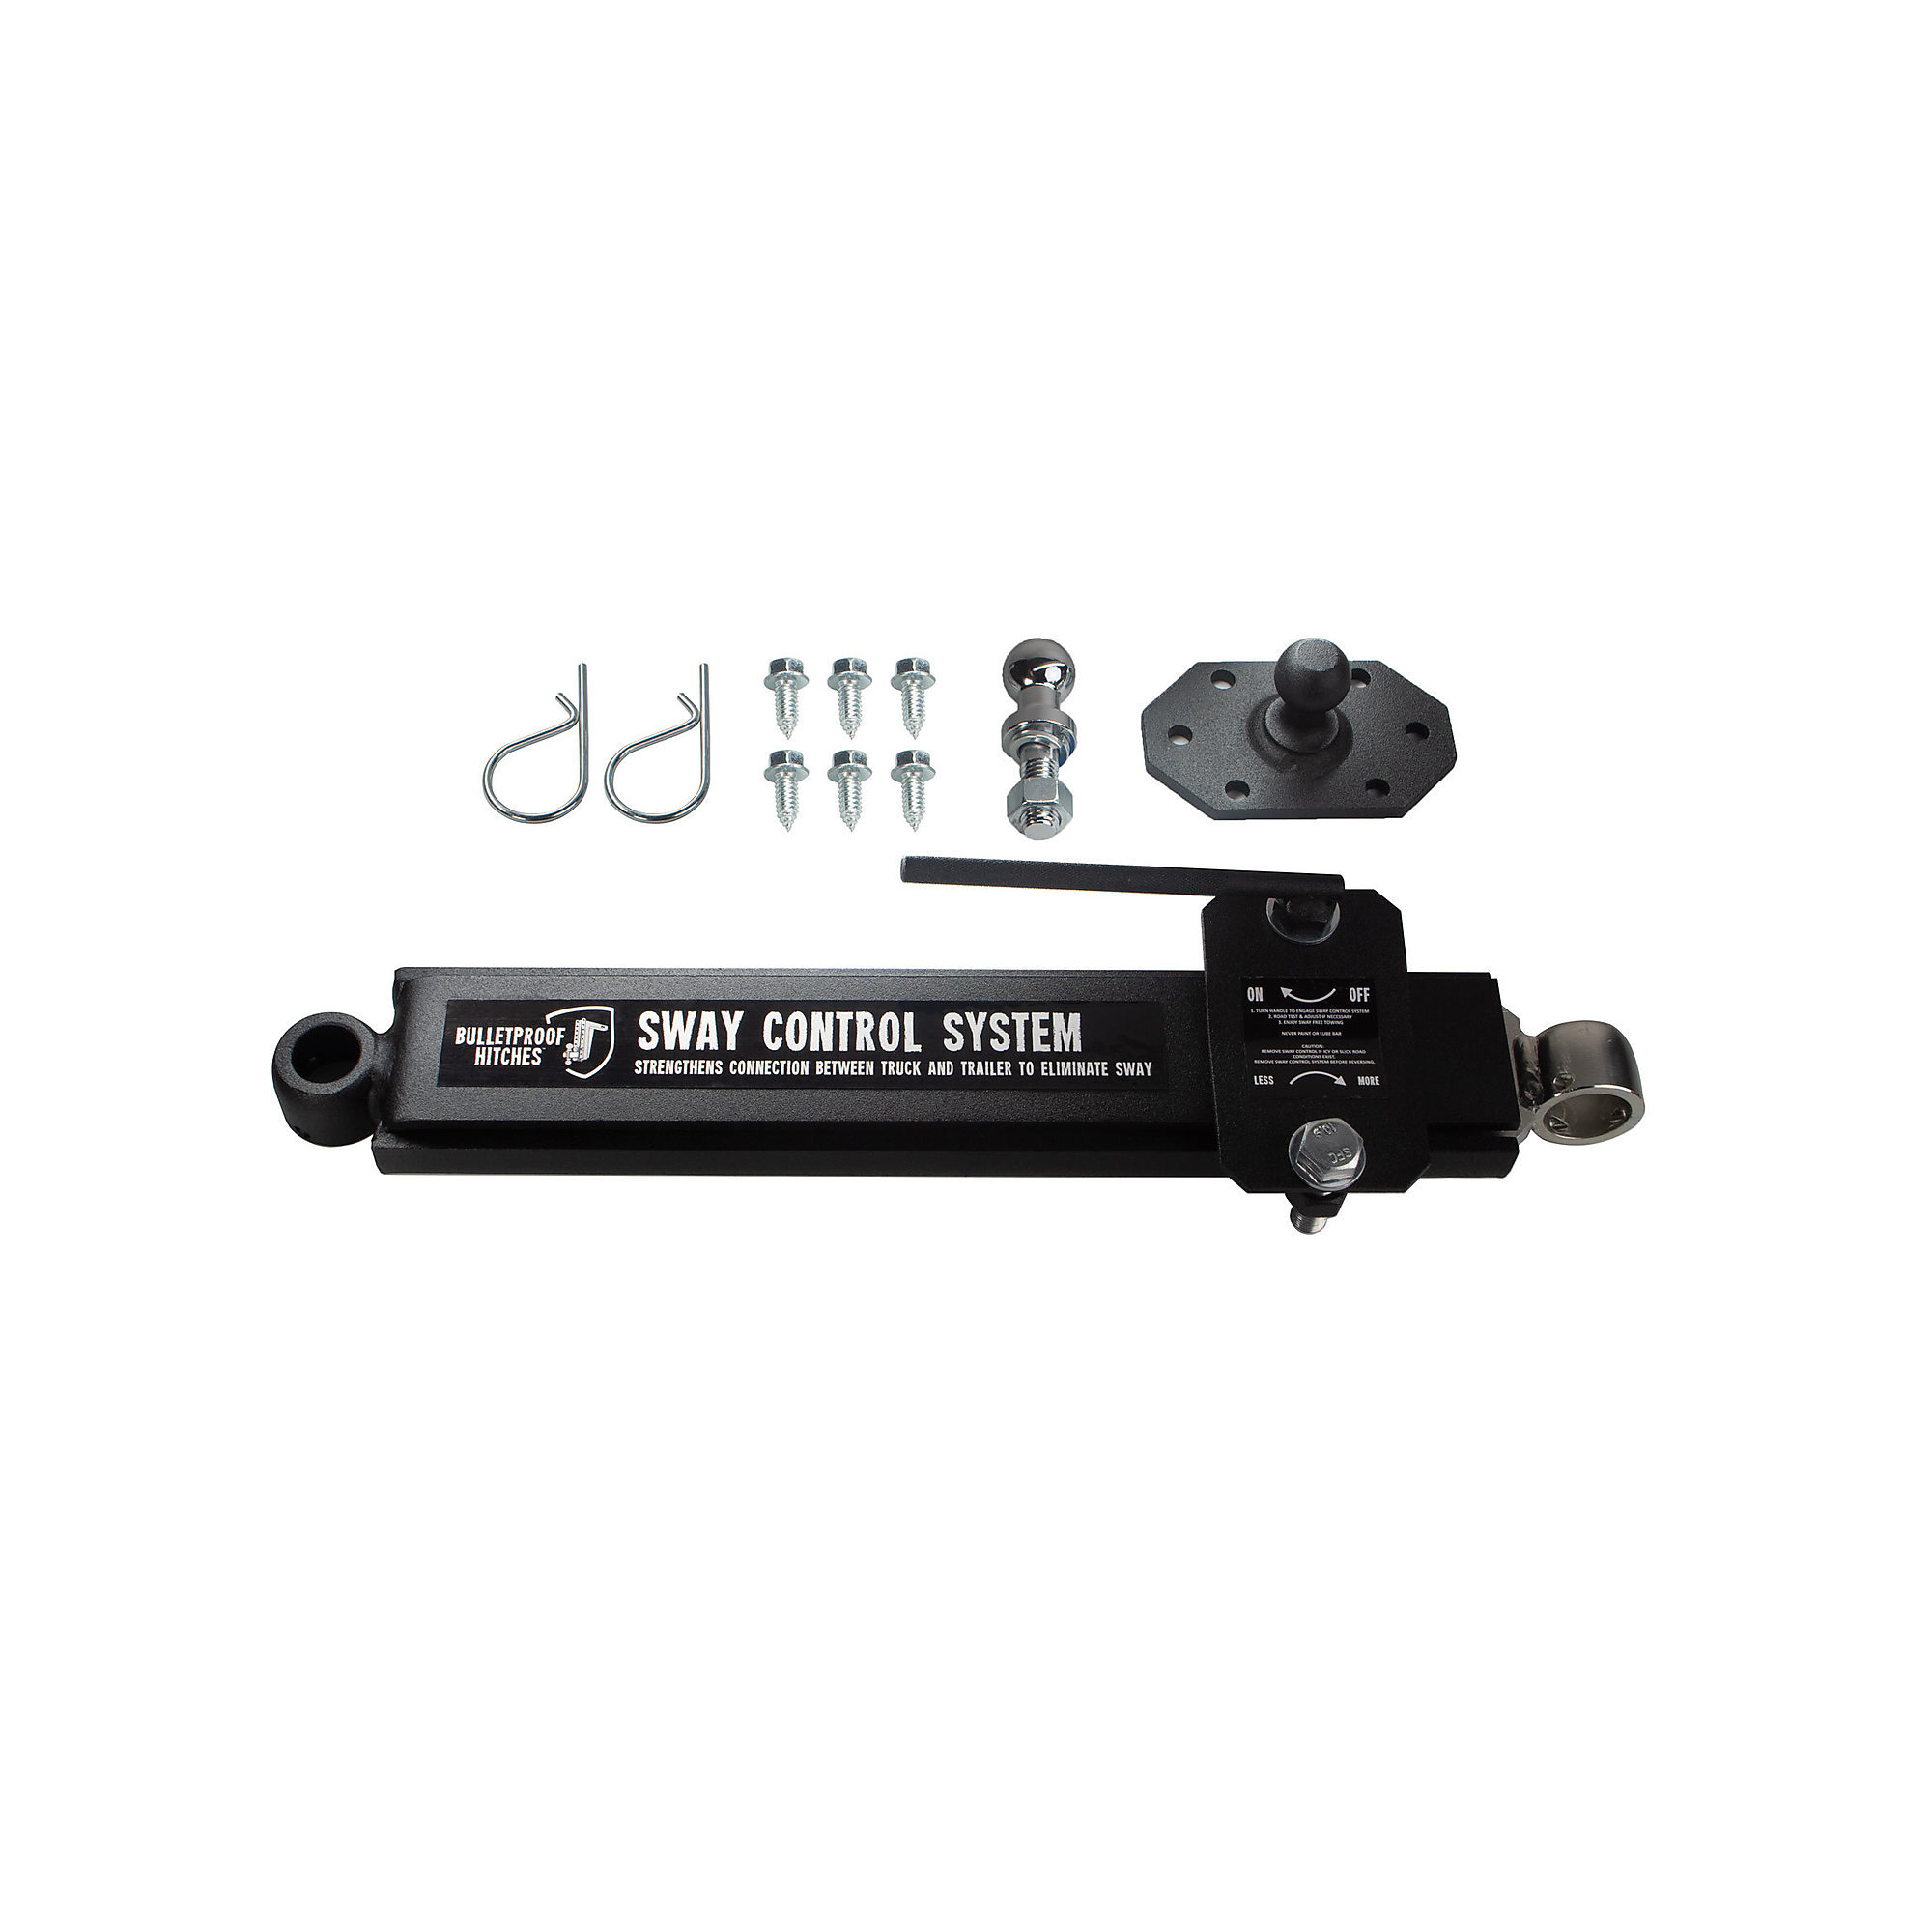 BulletProof Hitches, SWAY CONTROL SYSTEM, Fits Receiver Size Multiple in, Model SWAYCONTROL